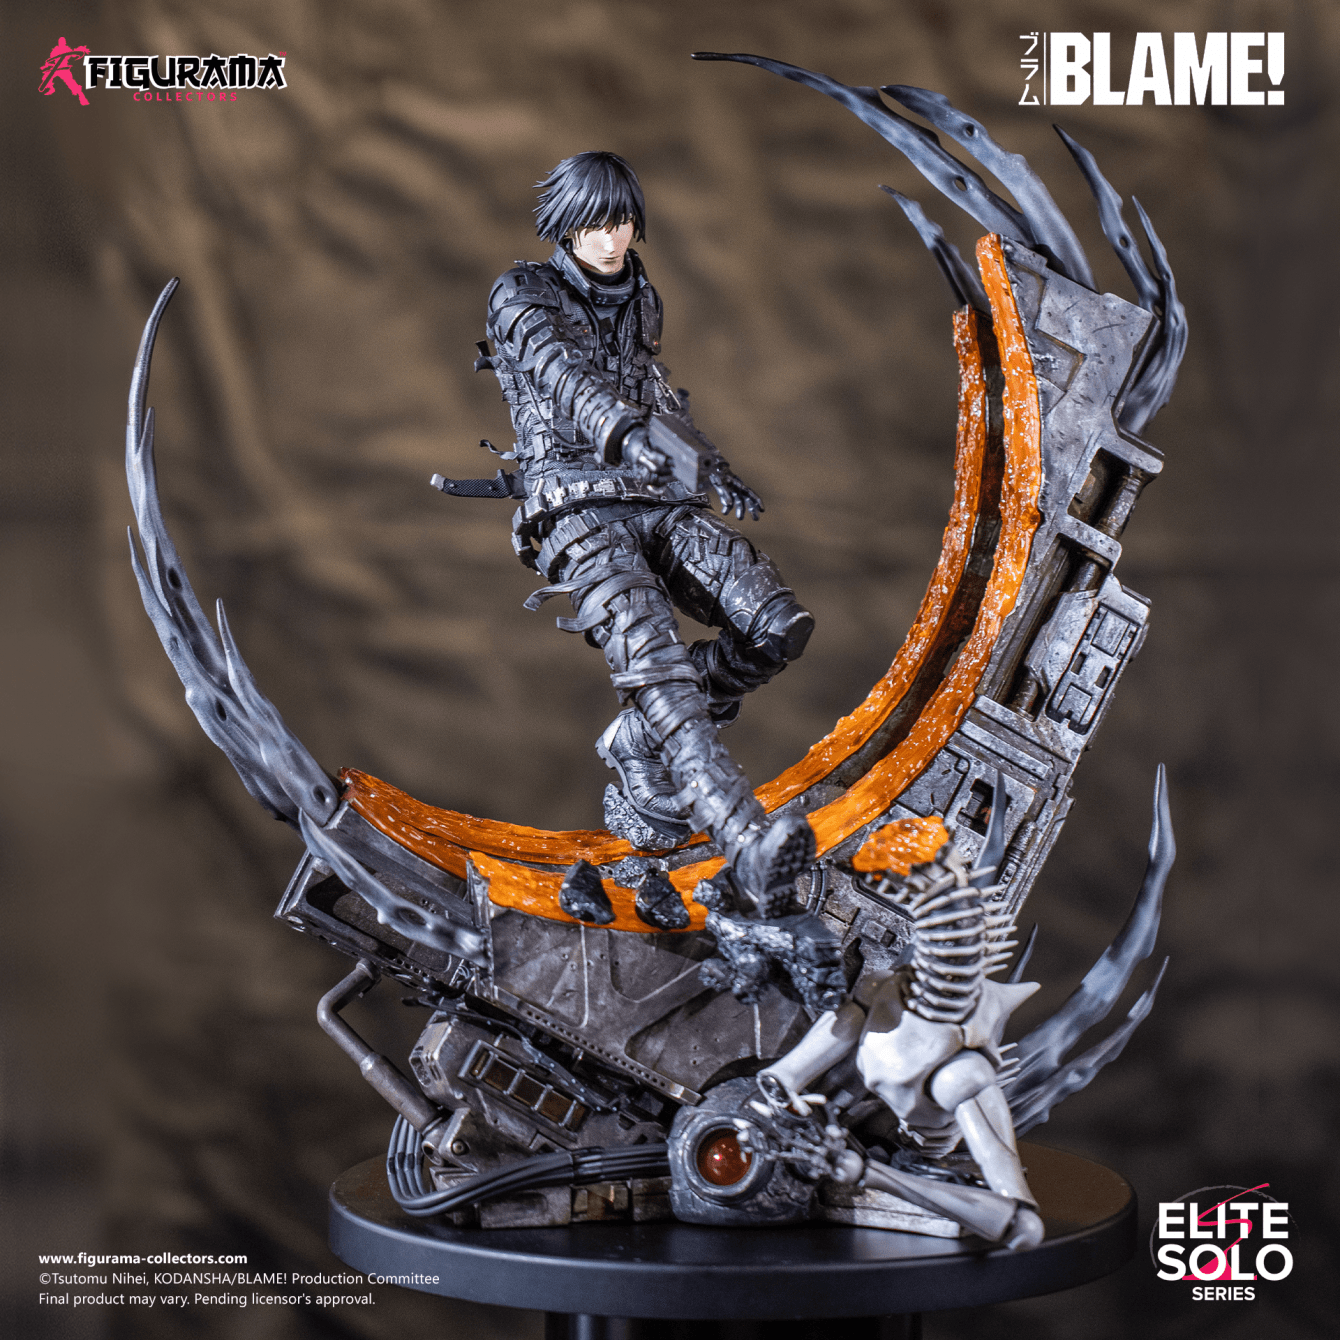 Blame!  Killy Elite Solo Statue: Preorders open on March 27th